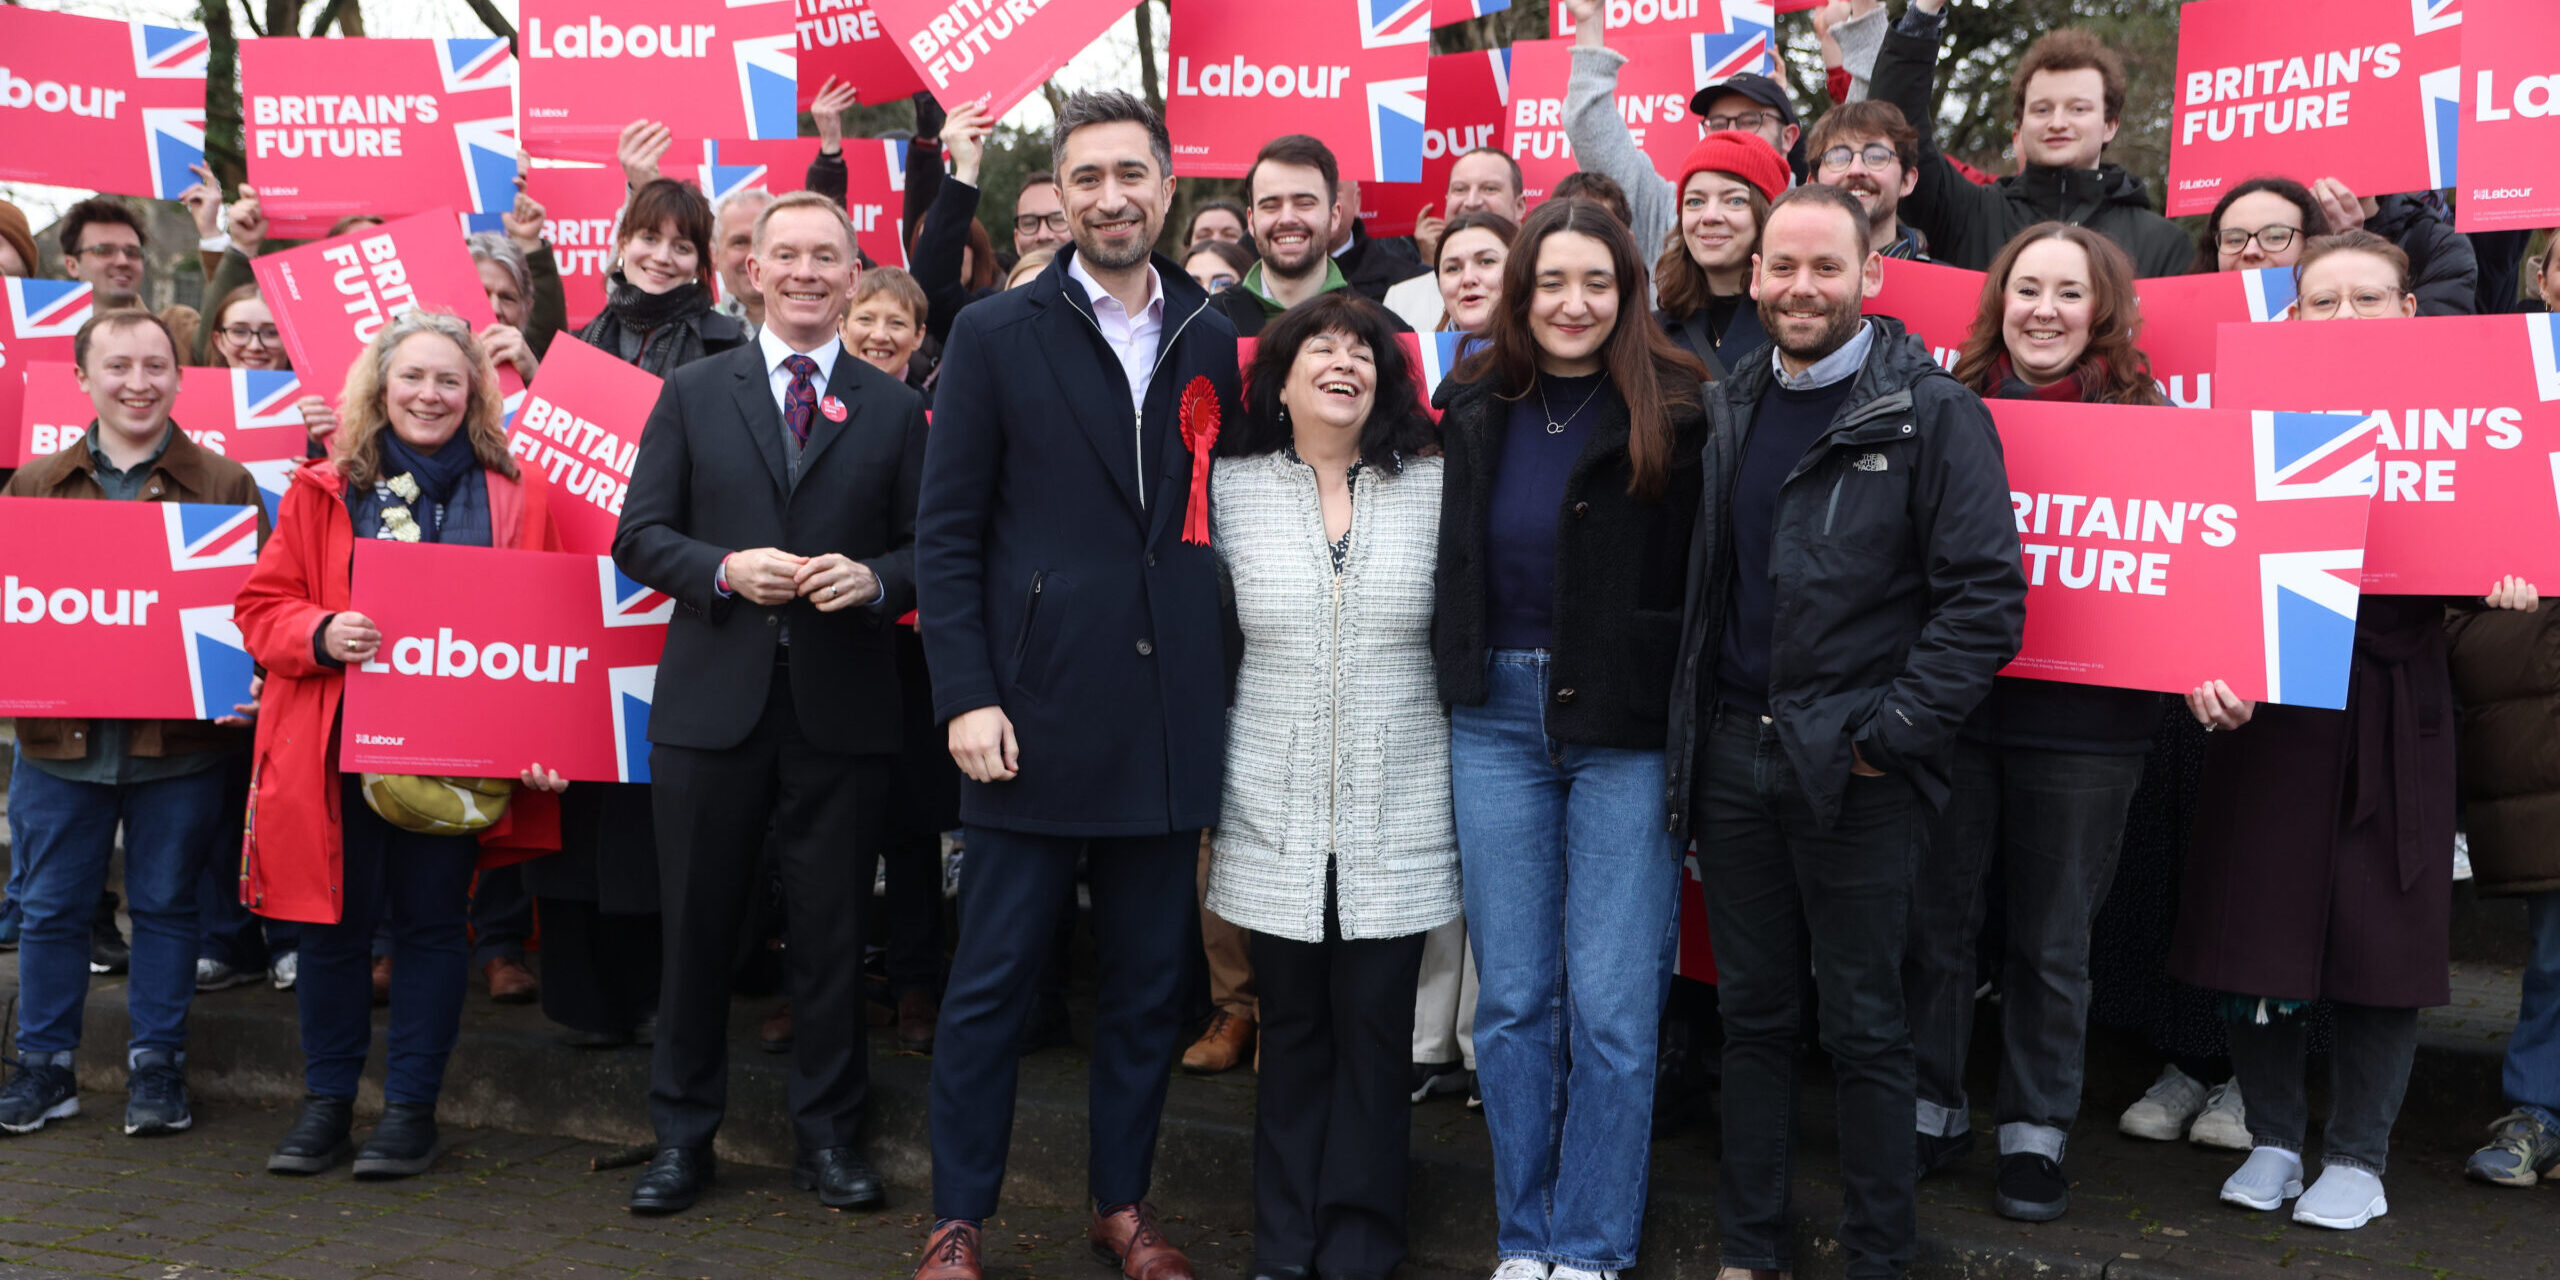 New Labour MP Damien Egan surrounded by supporters waving red Labour placards